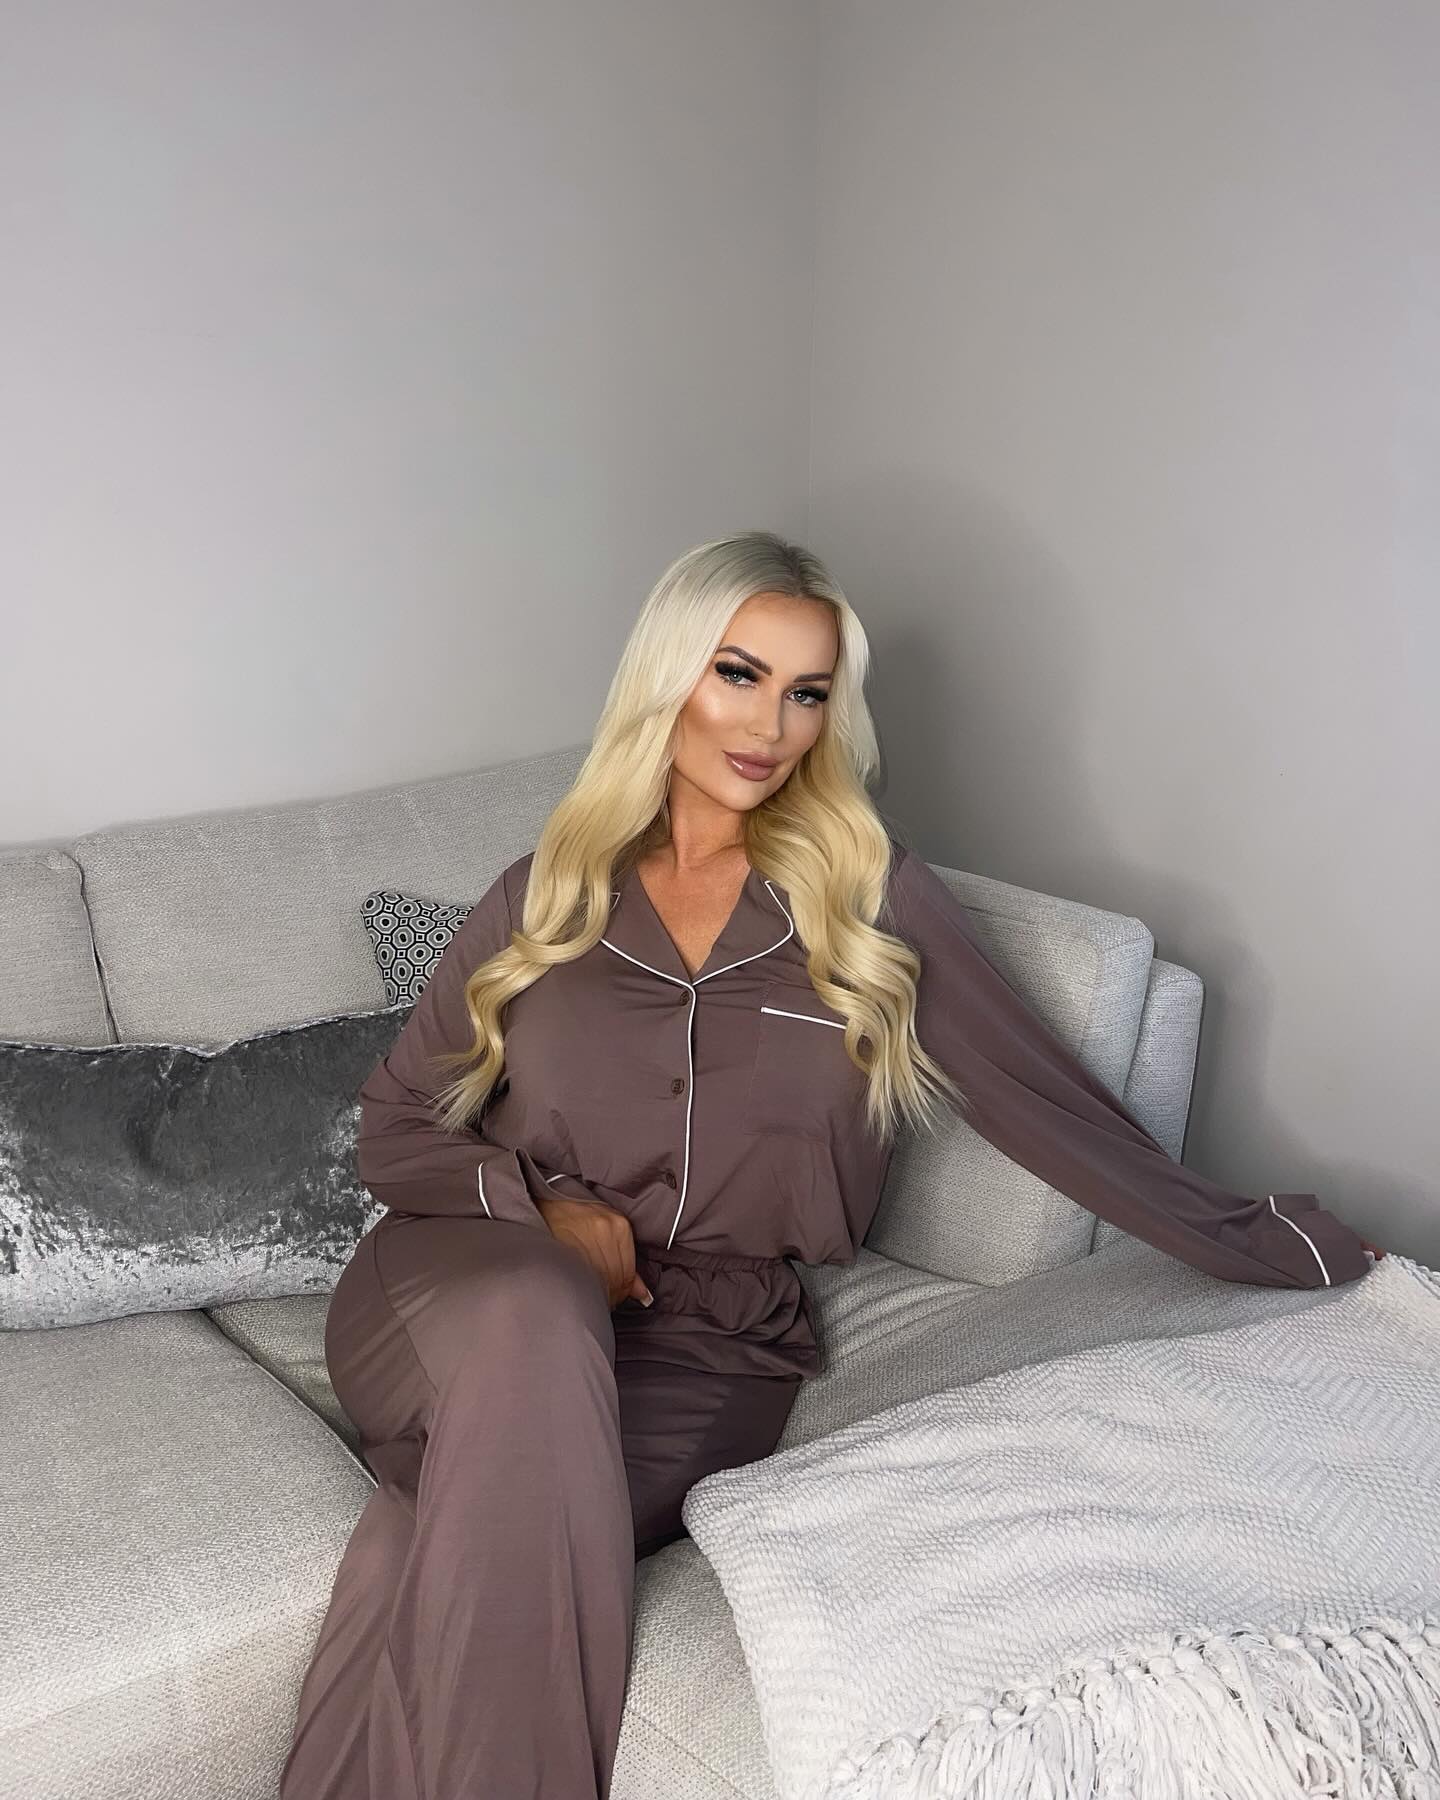 Lounging around ☁️ 

Wearing @luvletteofficial high quality, soft & breathable pj set 19347411 🔎 size XL
My promo code ‘luvedge’ can be used on Luvlette and SHEIN for an additional 15% off!

Thank you @sintillatetalent @sinan_sahin 🫶🏼

#LuvlettePartner #Luvlette #SintillateTalent #TalentTeam #Sinfluenced #Advert